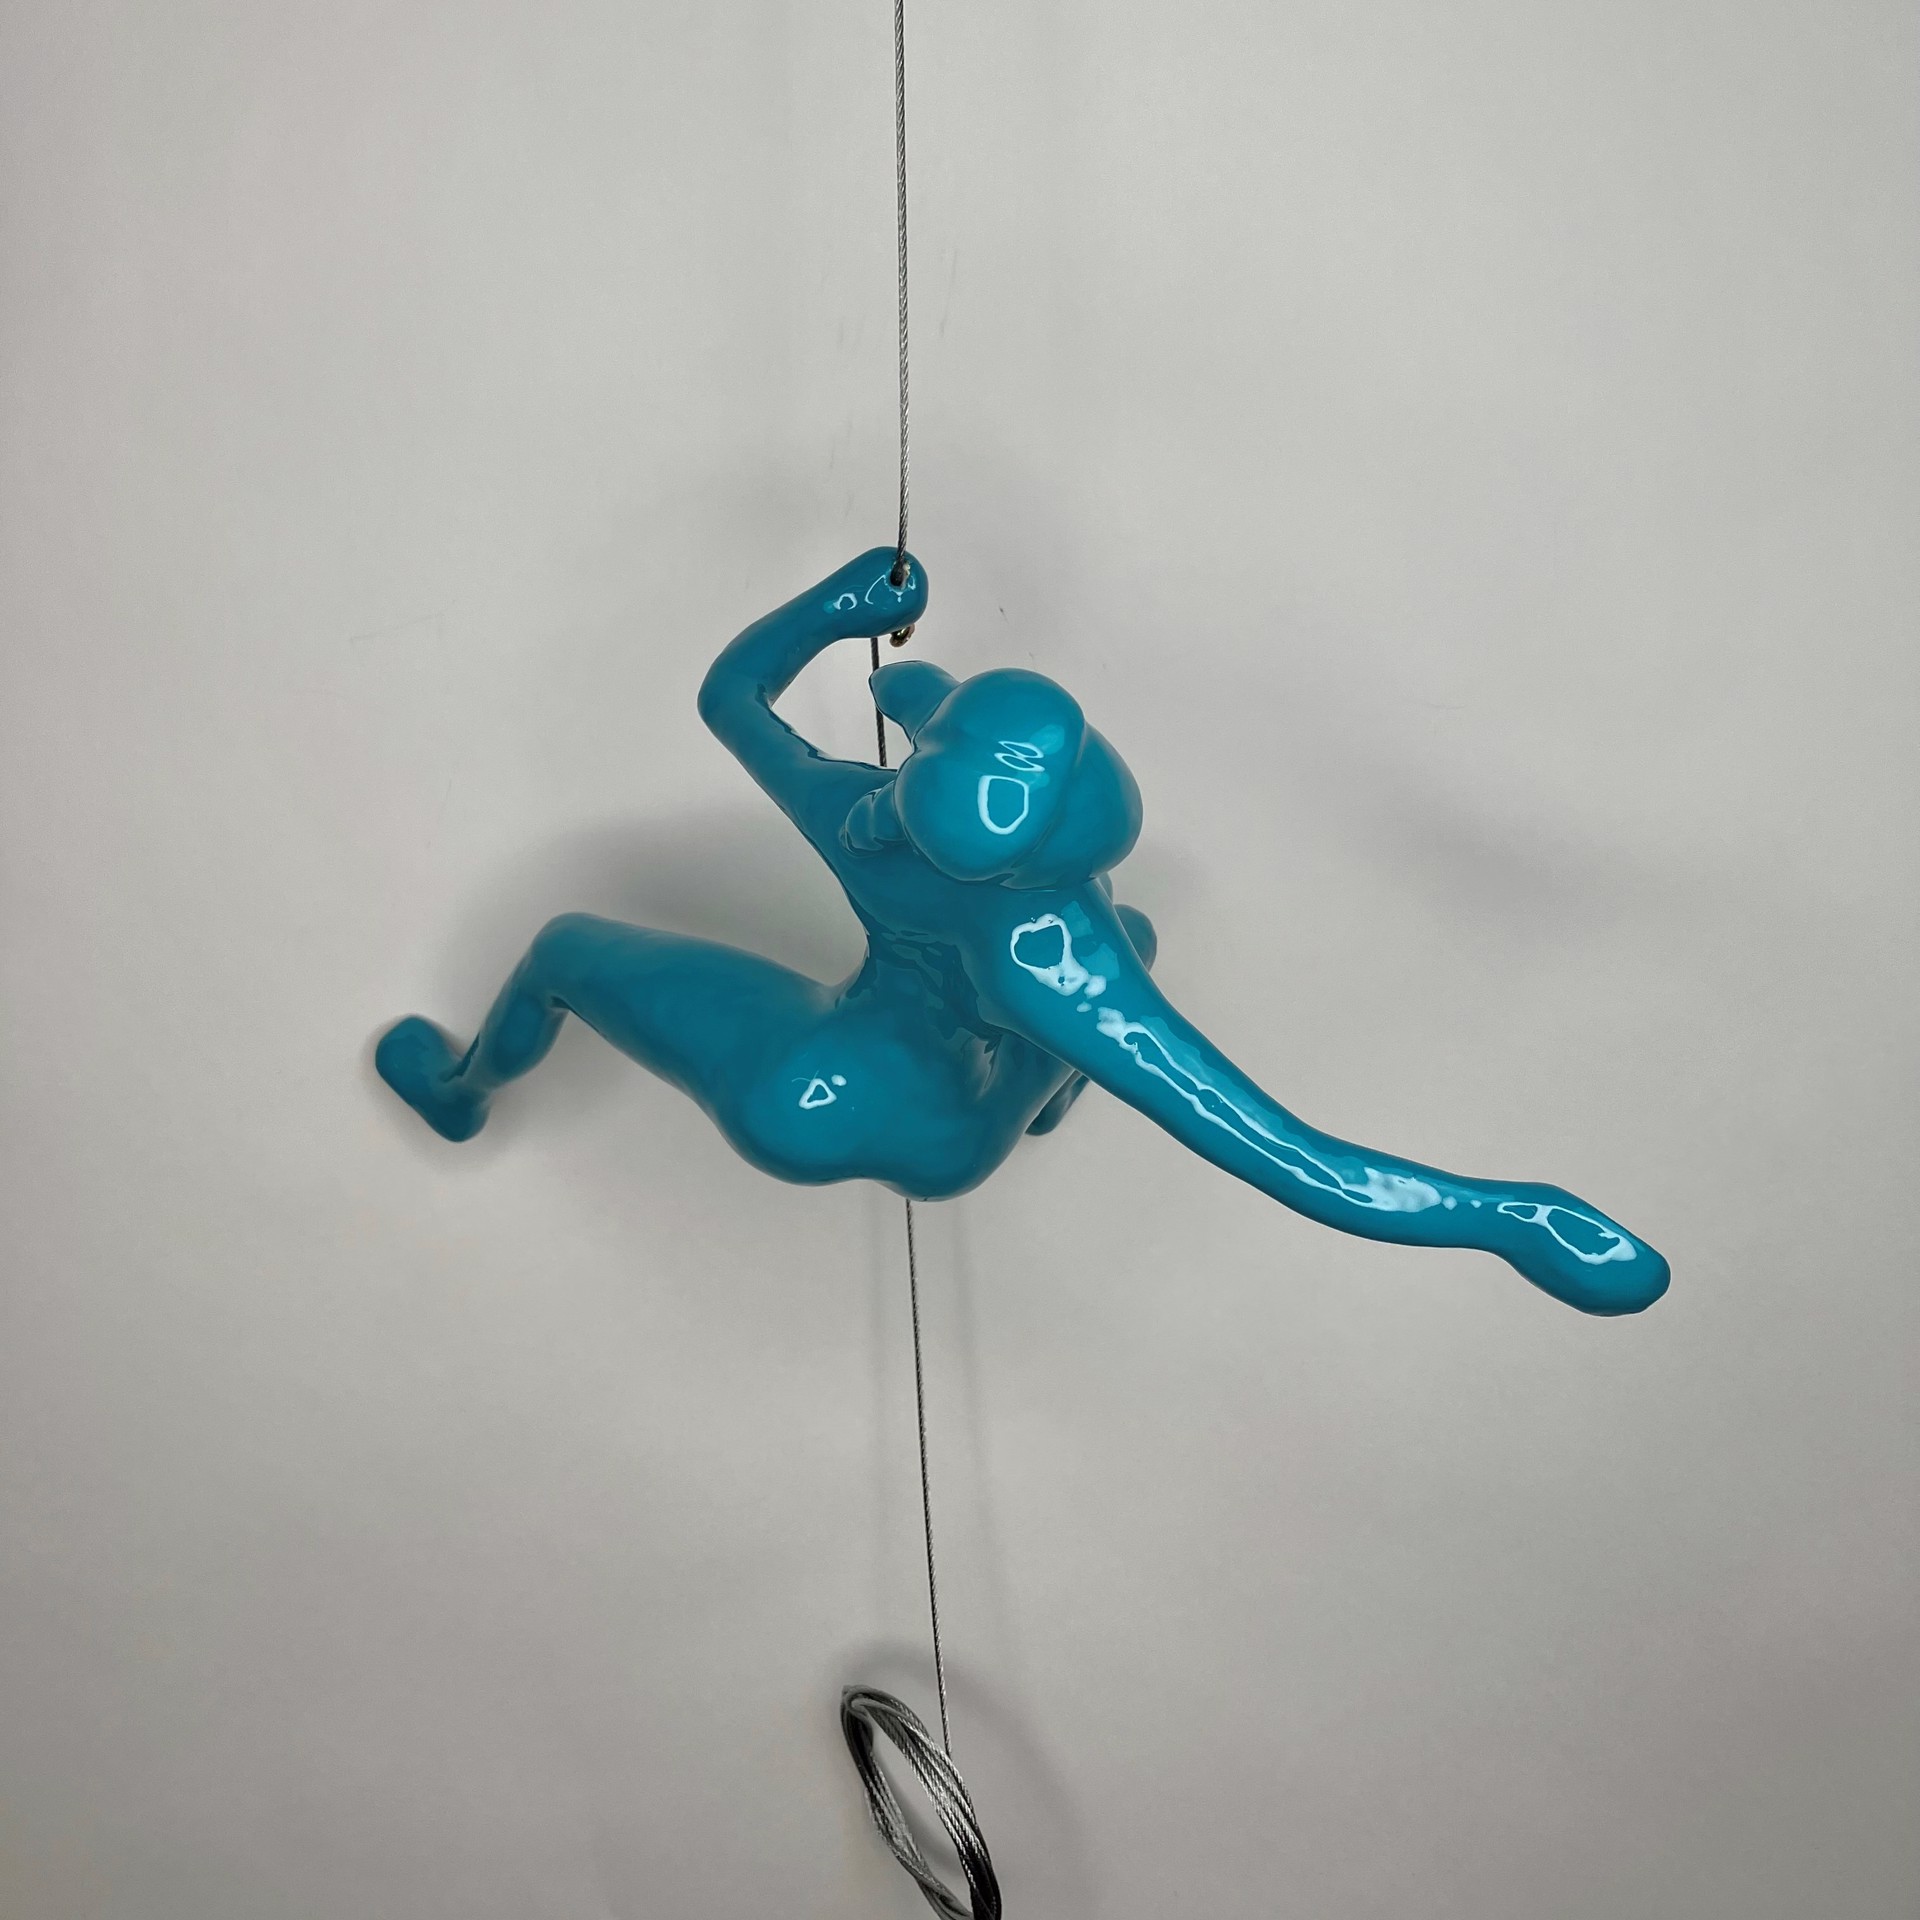 Female Climber 14-N ~ Position 14 in color Teal by Ancizar Marin